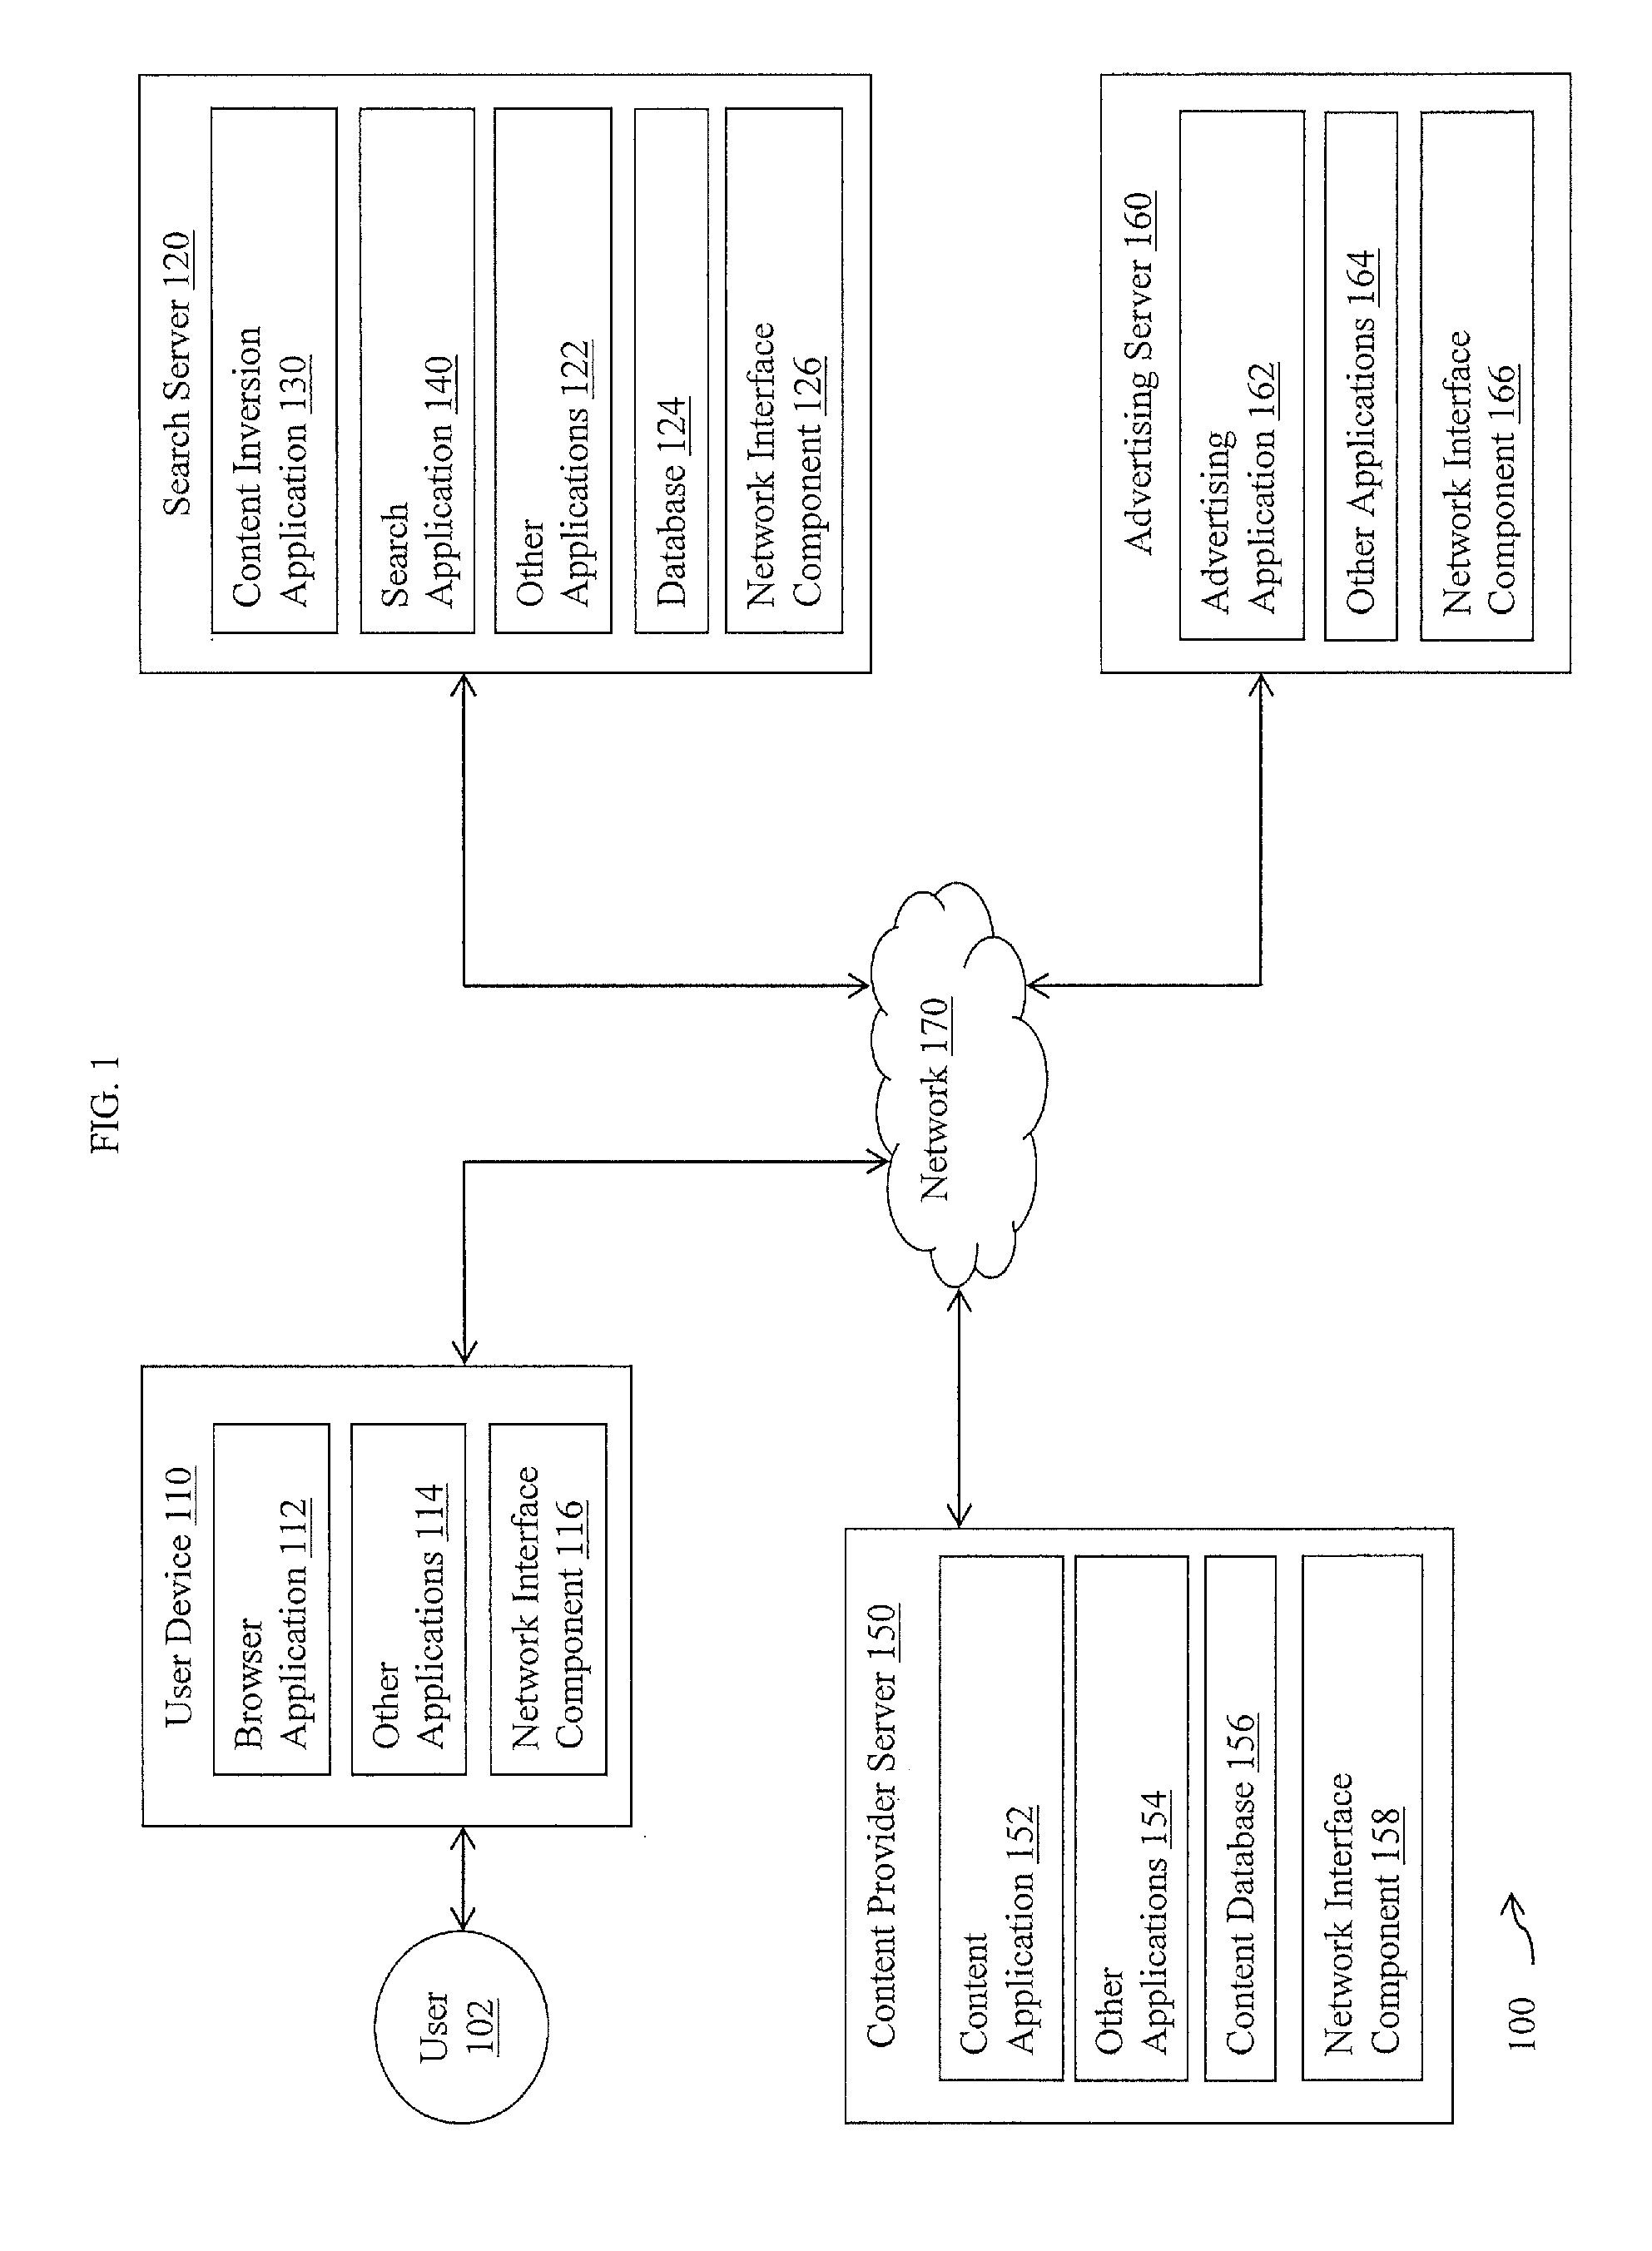 Content inversion for user searches and product recommendations systems and methods